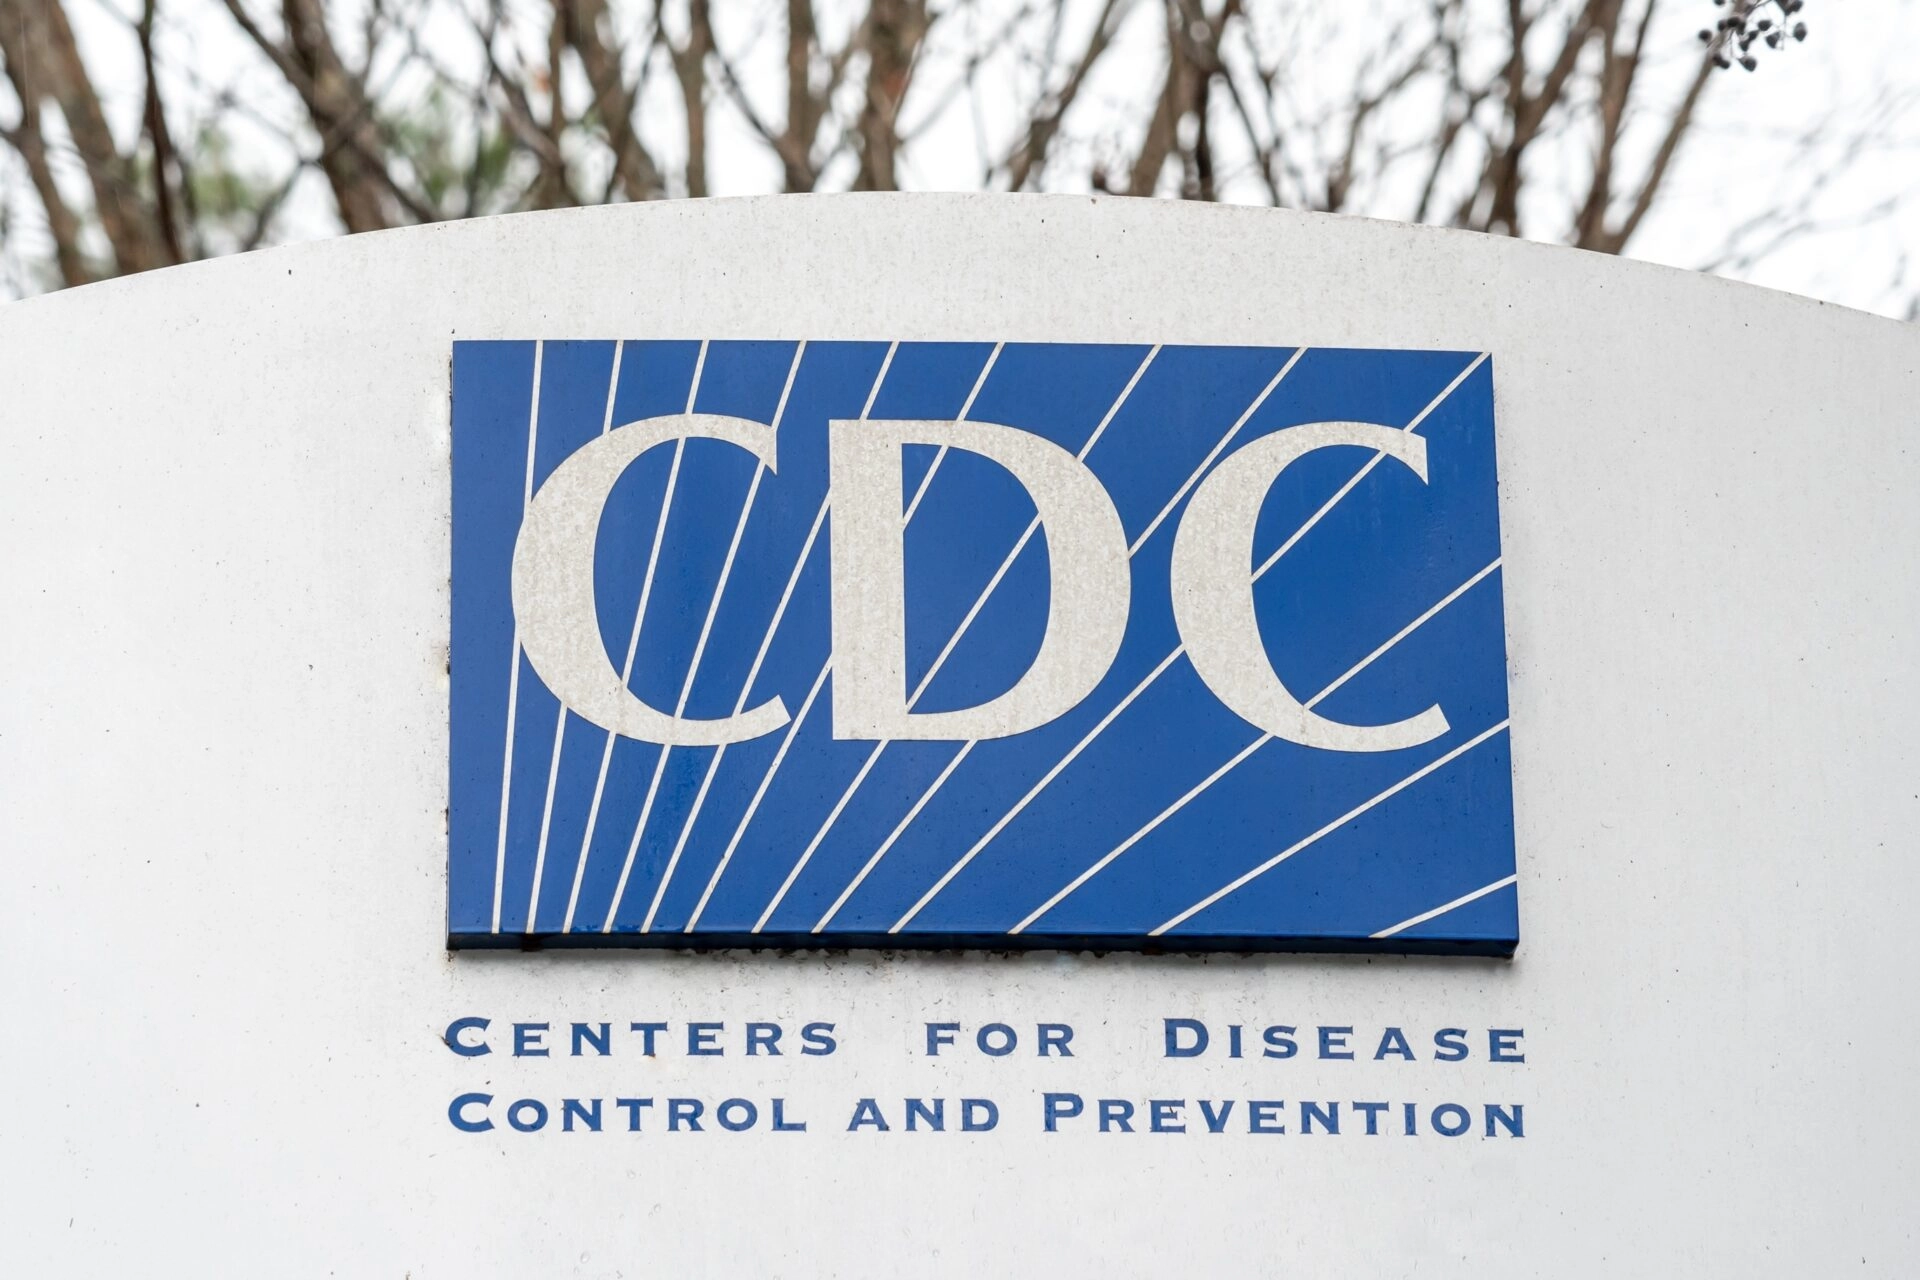 The CDC Has New Updates to Their Clinical Practice Guidelines When It Comes to Opioids